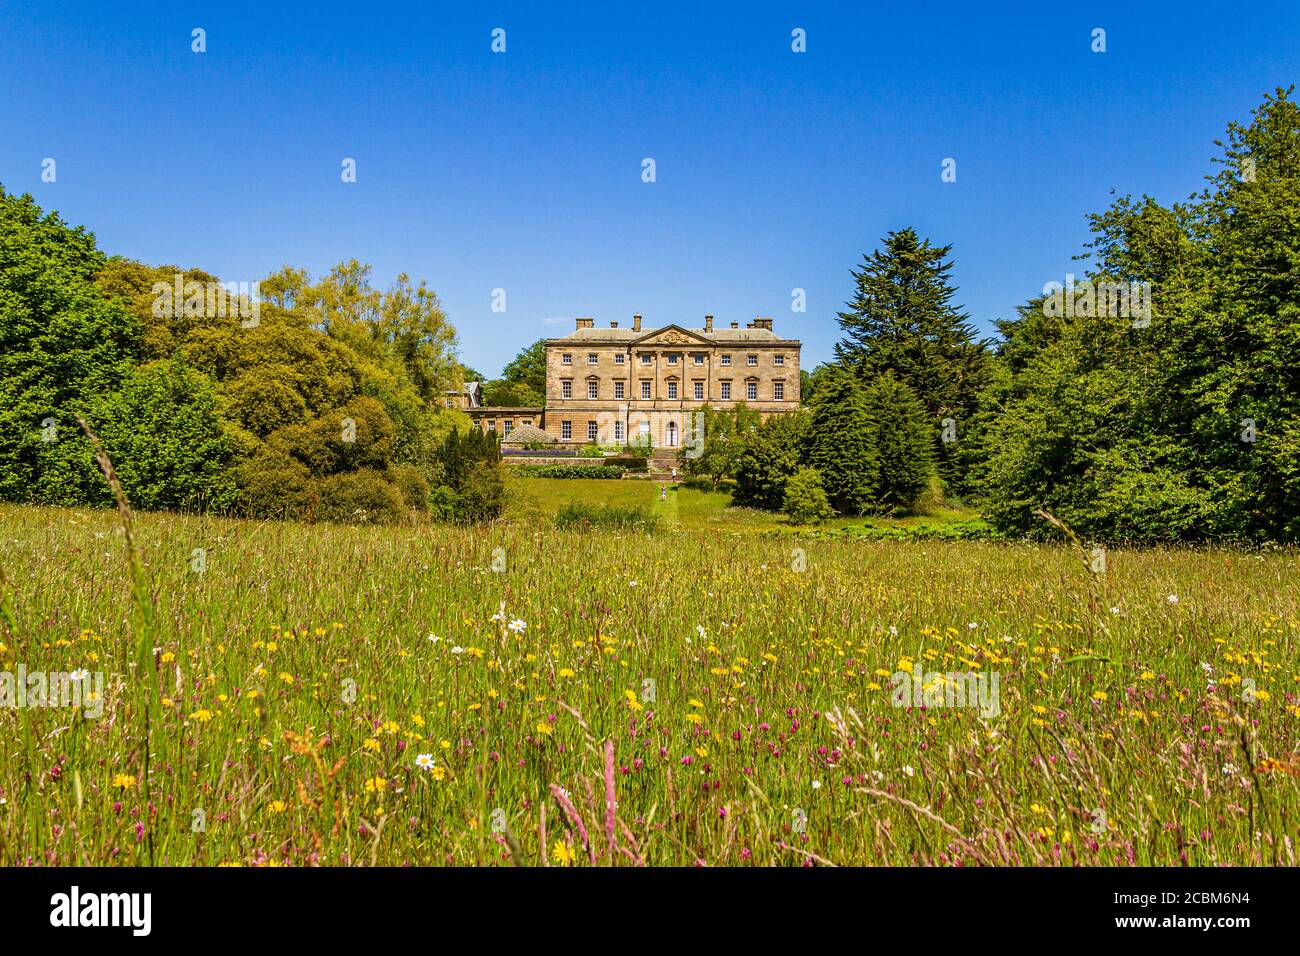 Howick Hall, Howick, Northumberland, Royaume-Uni Banque D'Images